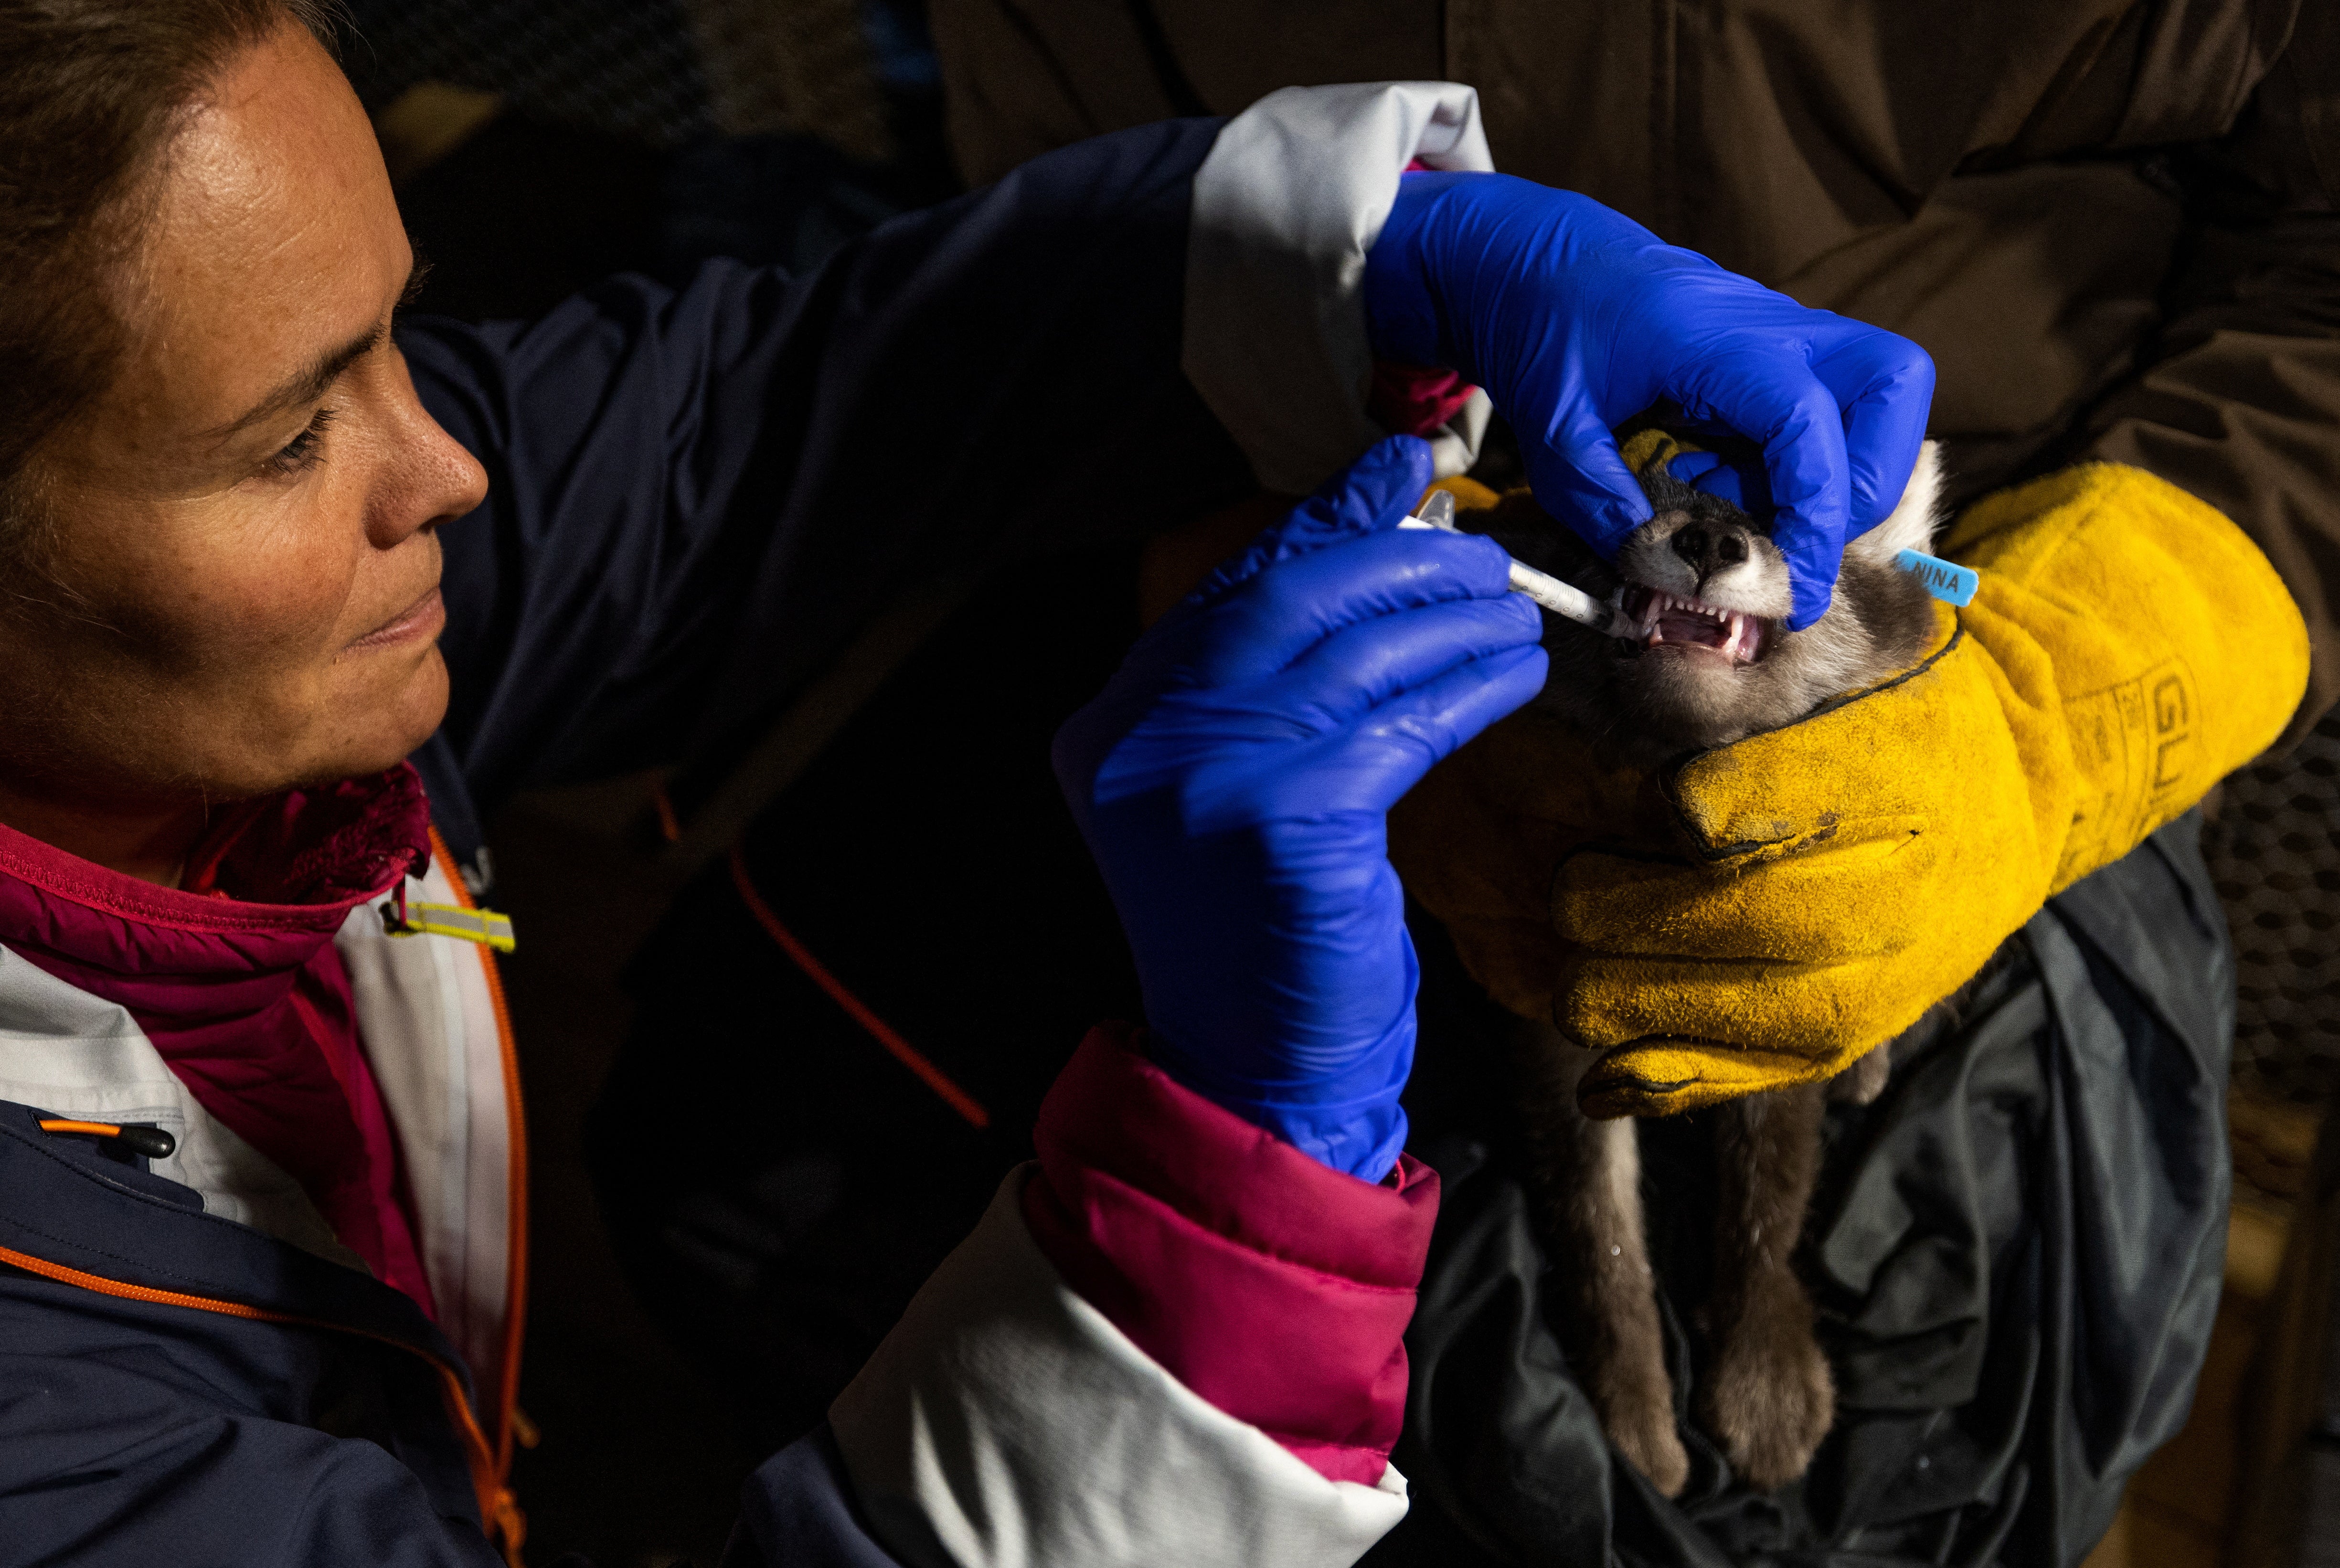 Veterinarian Marianne Furnes feeds parasite medication to a white Arctic fox pup during a medical check-up